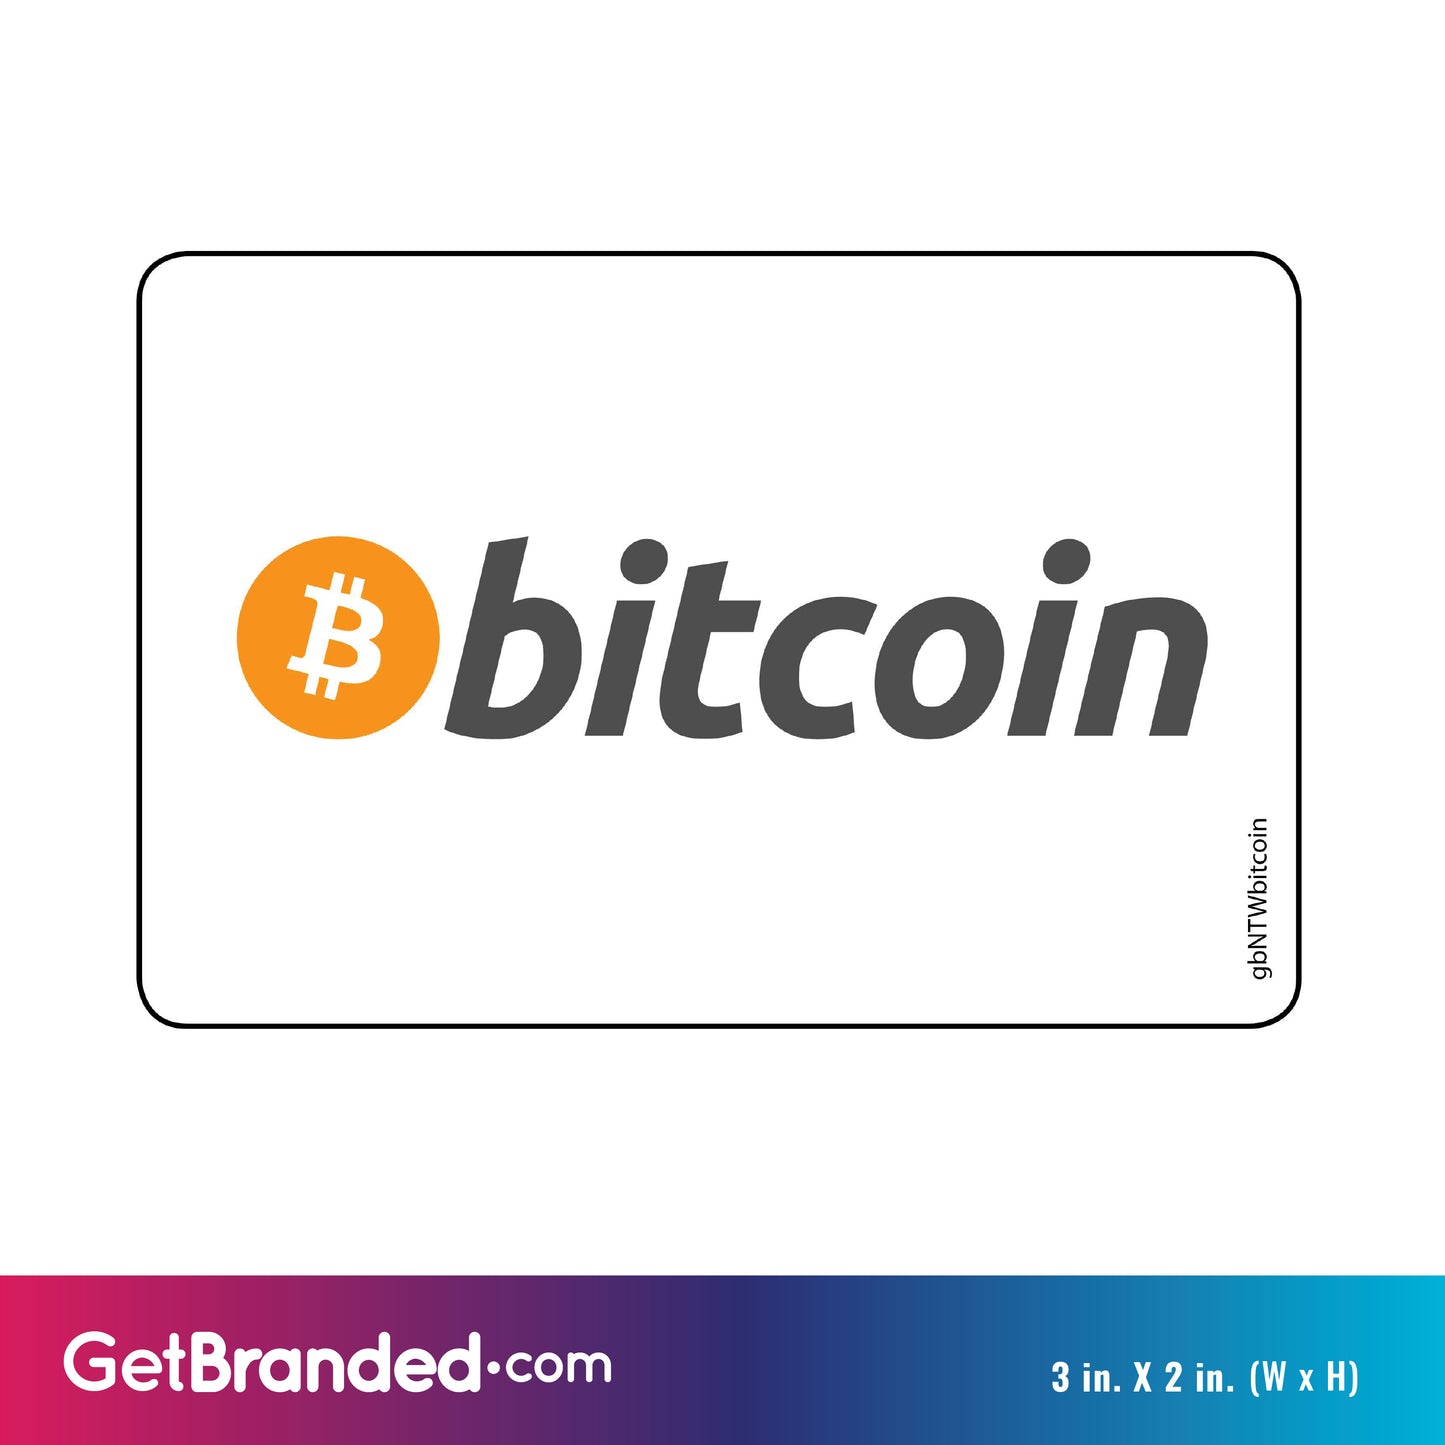 Single Network Decal, Bitcoin Decal size guide. 3 inches by 2 inches in size.